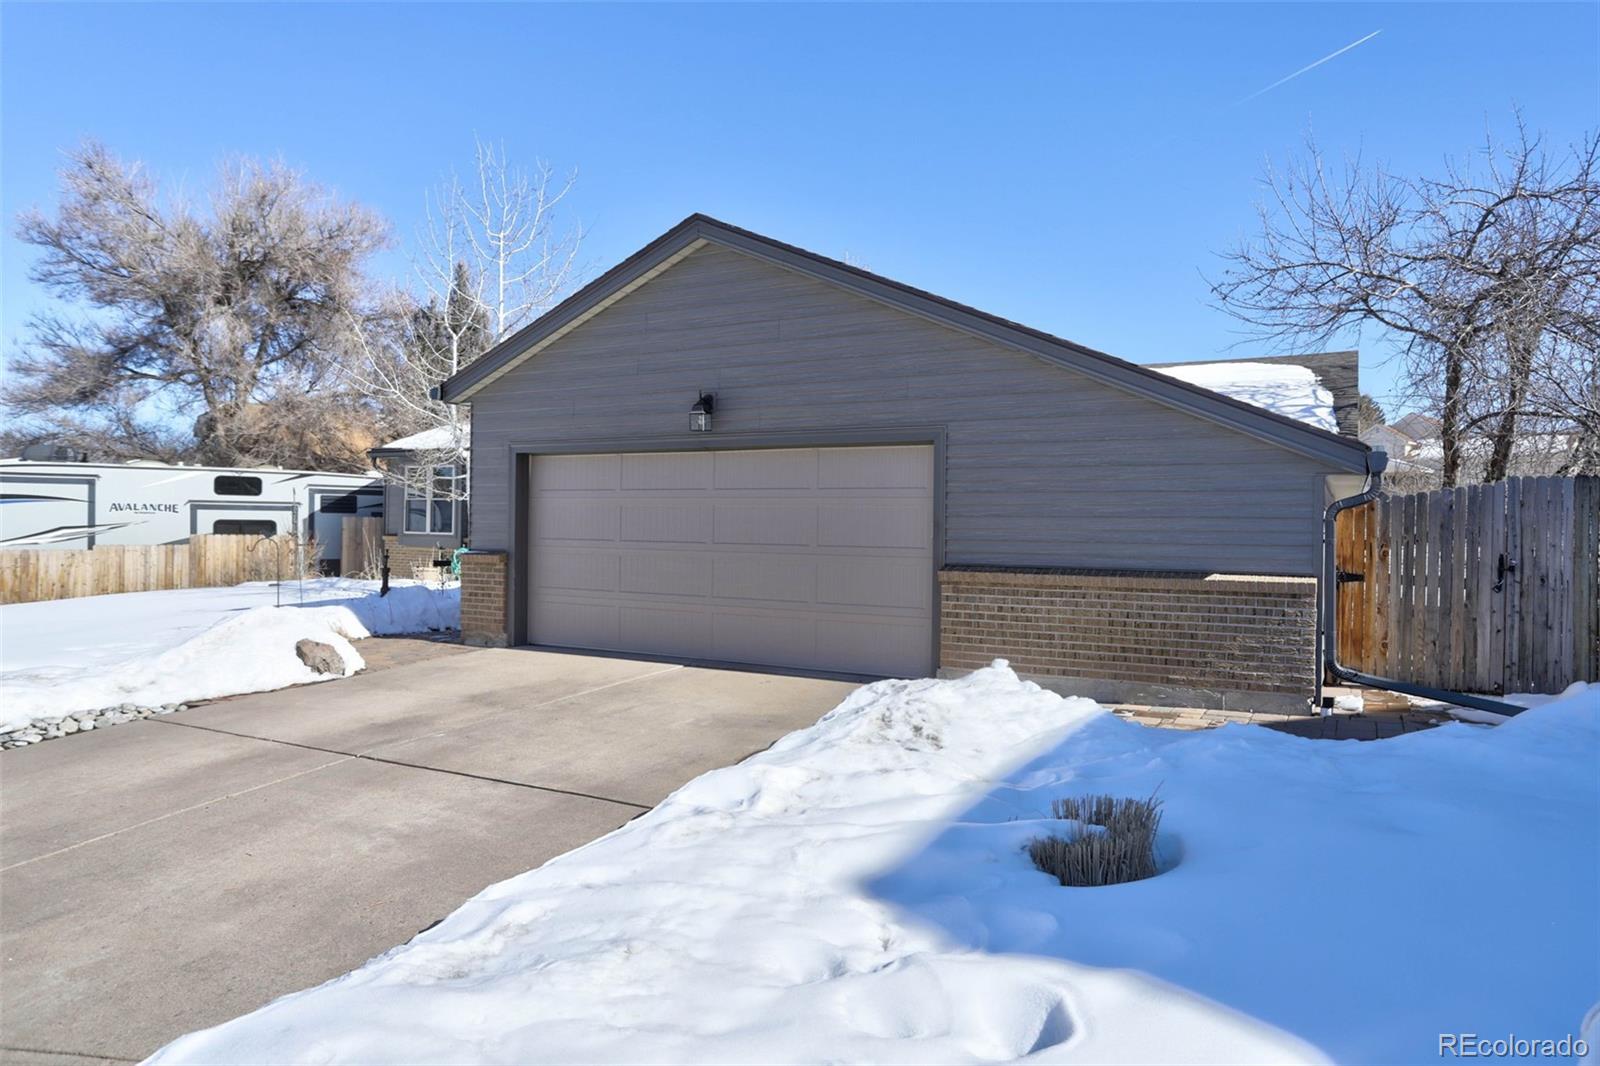 Report Image for 5562 S Moore Street,Littleton, Colorado